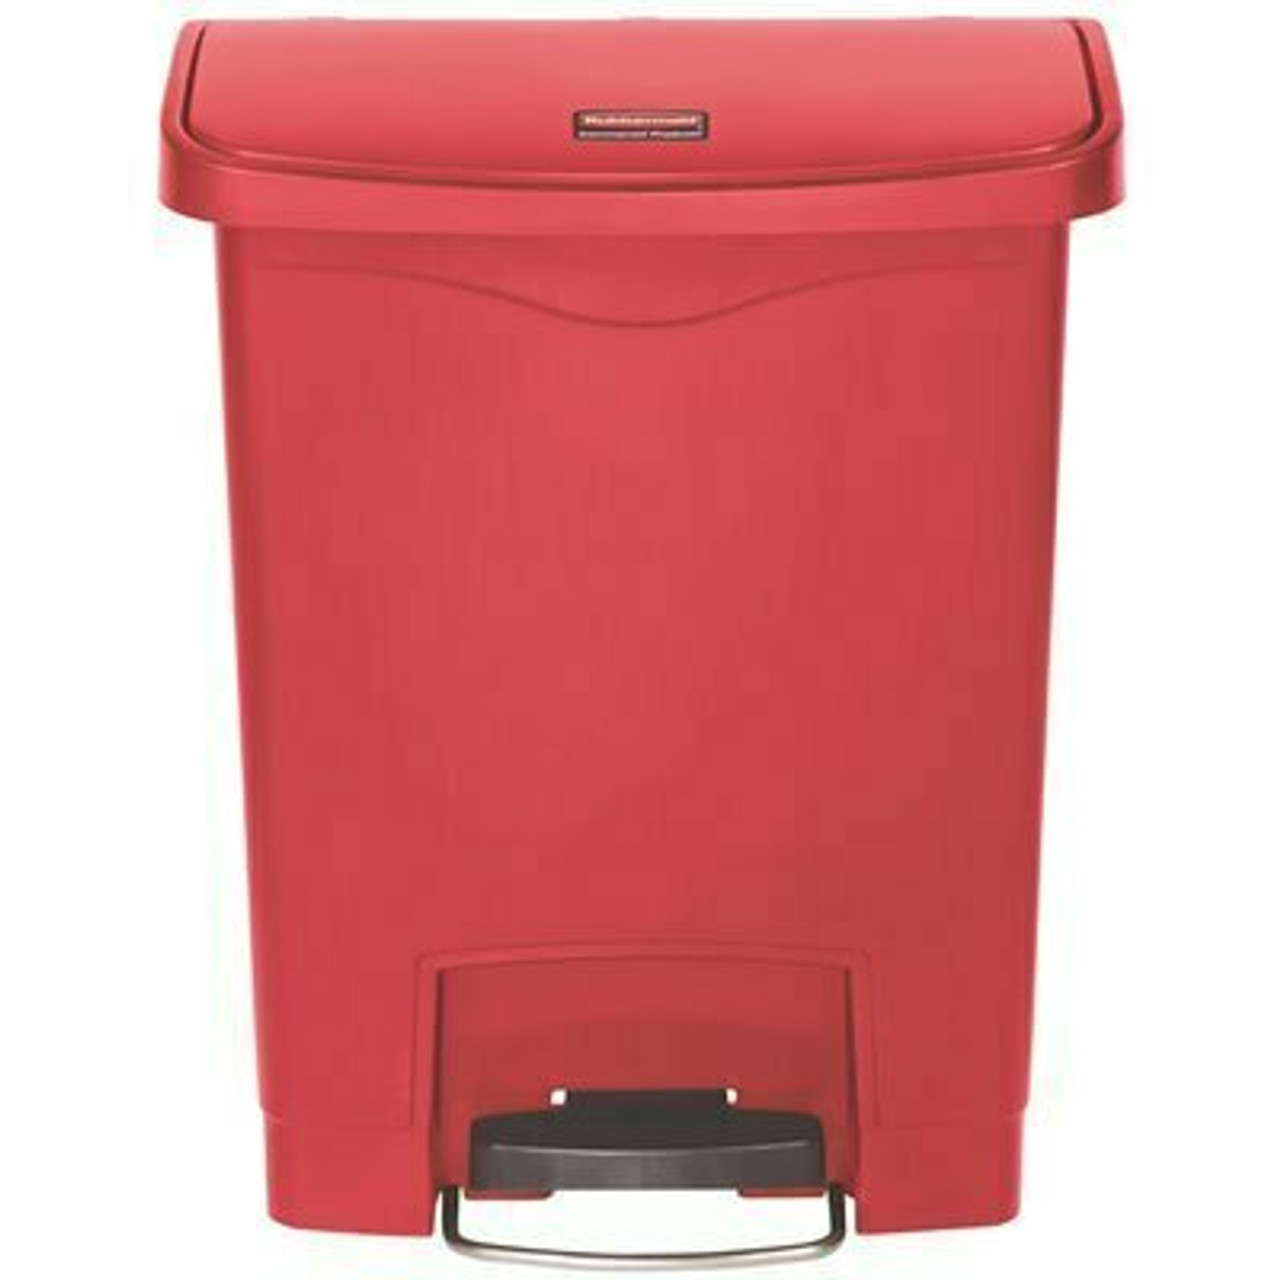 Rubbermaid Commercial Products Slim Jim Step-On 8 Gal. Red Plastic Front Step Trash Can